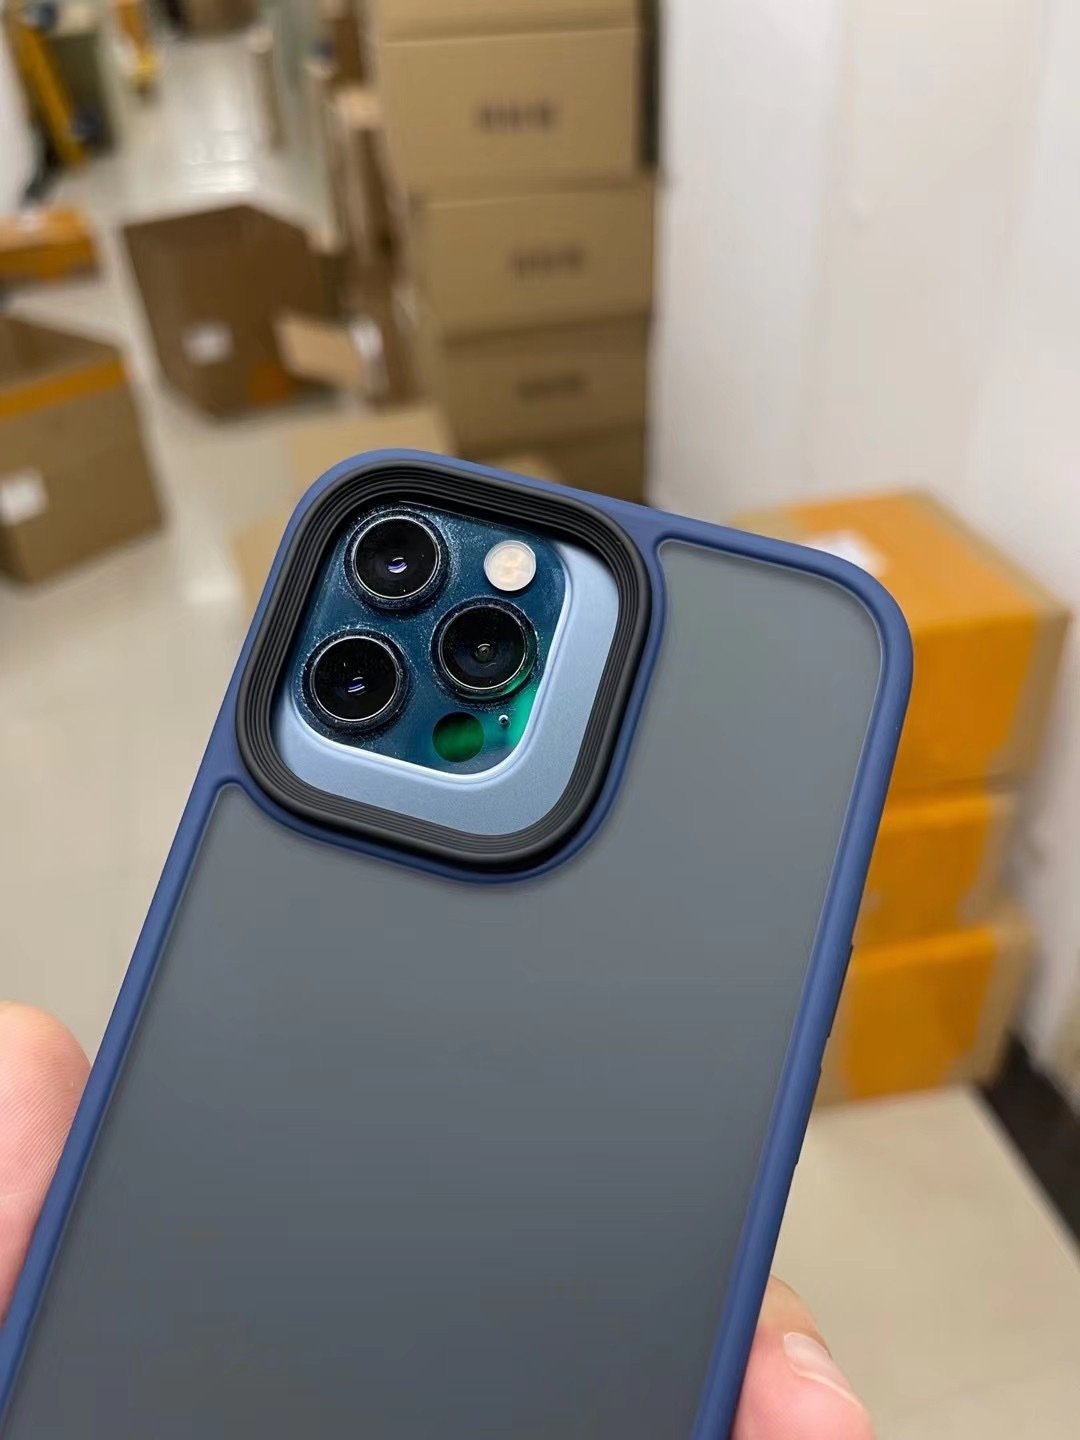 iPhone 13 Pro Protective Case Revealed: Larger Camera Module On New ...